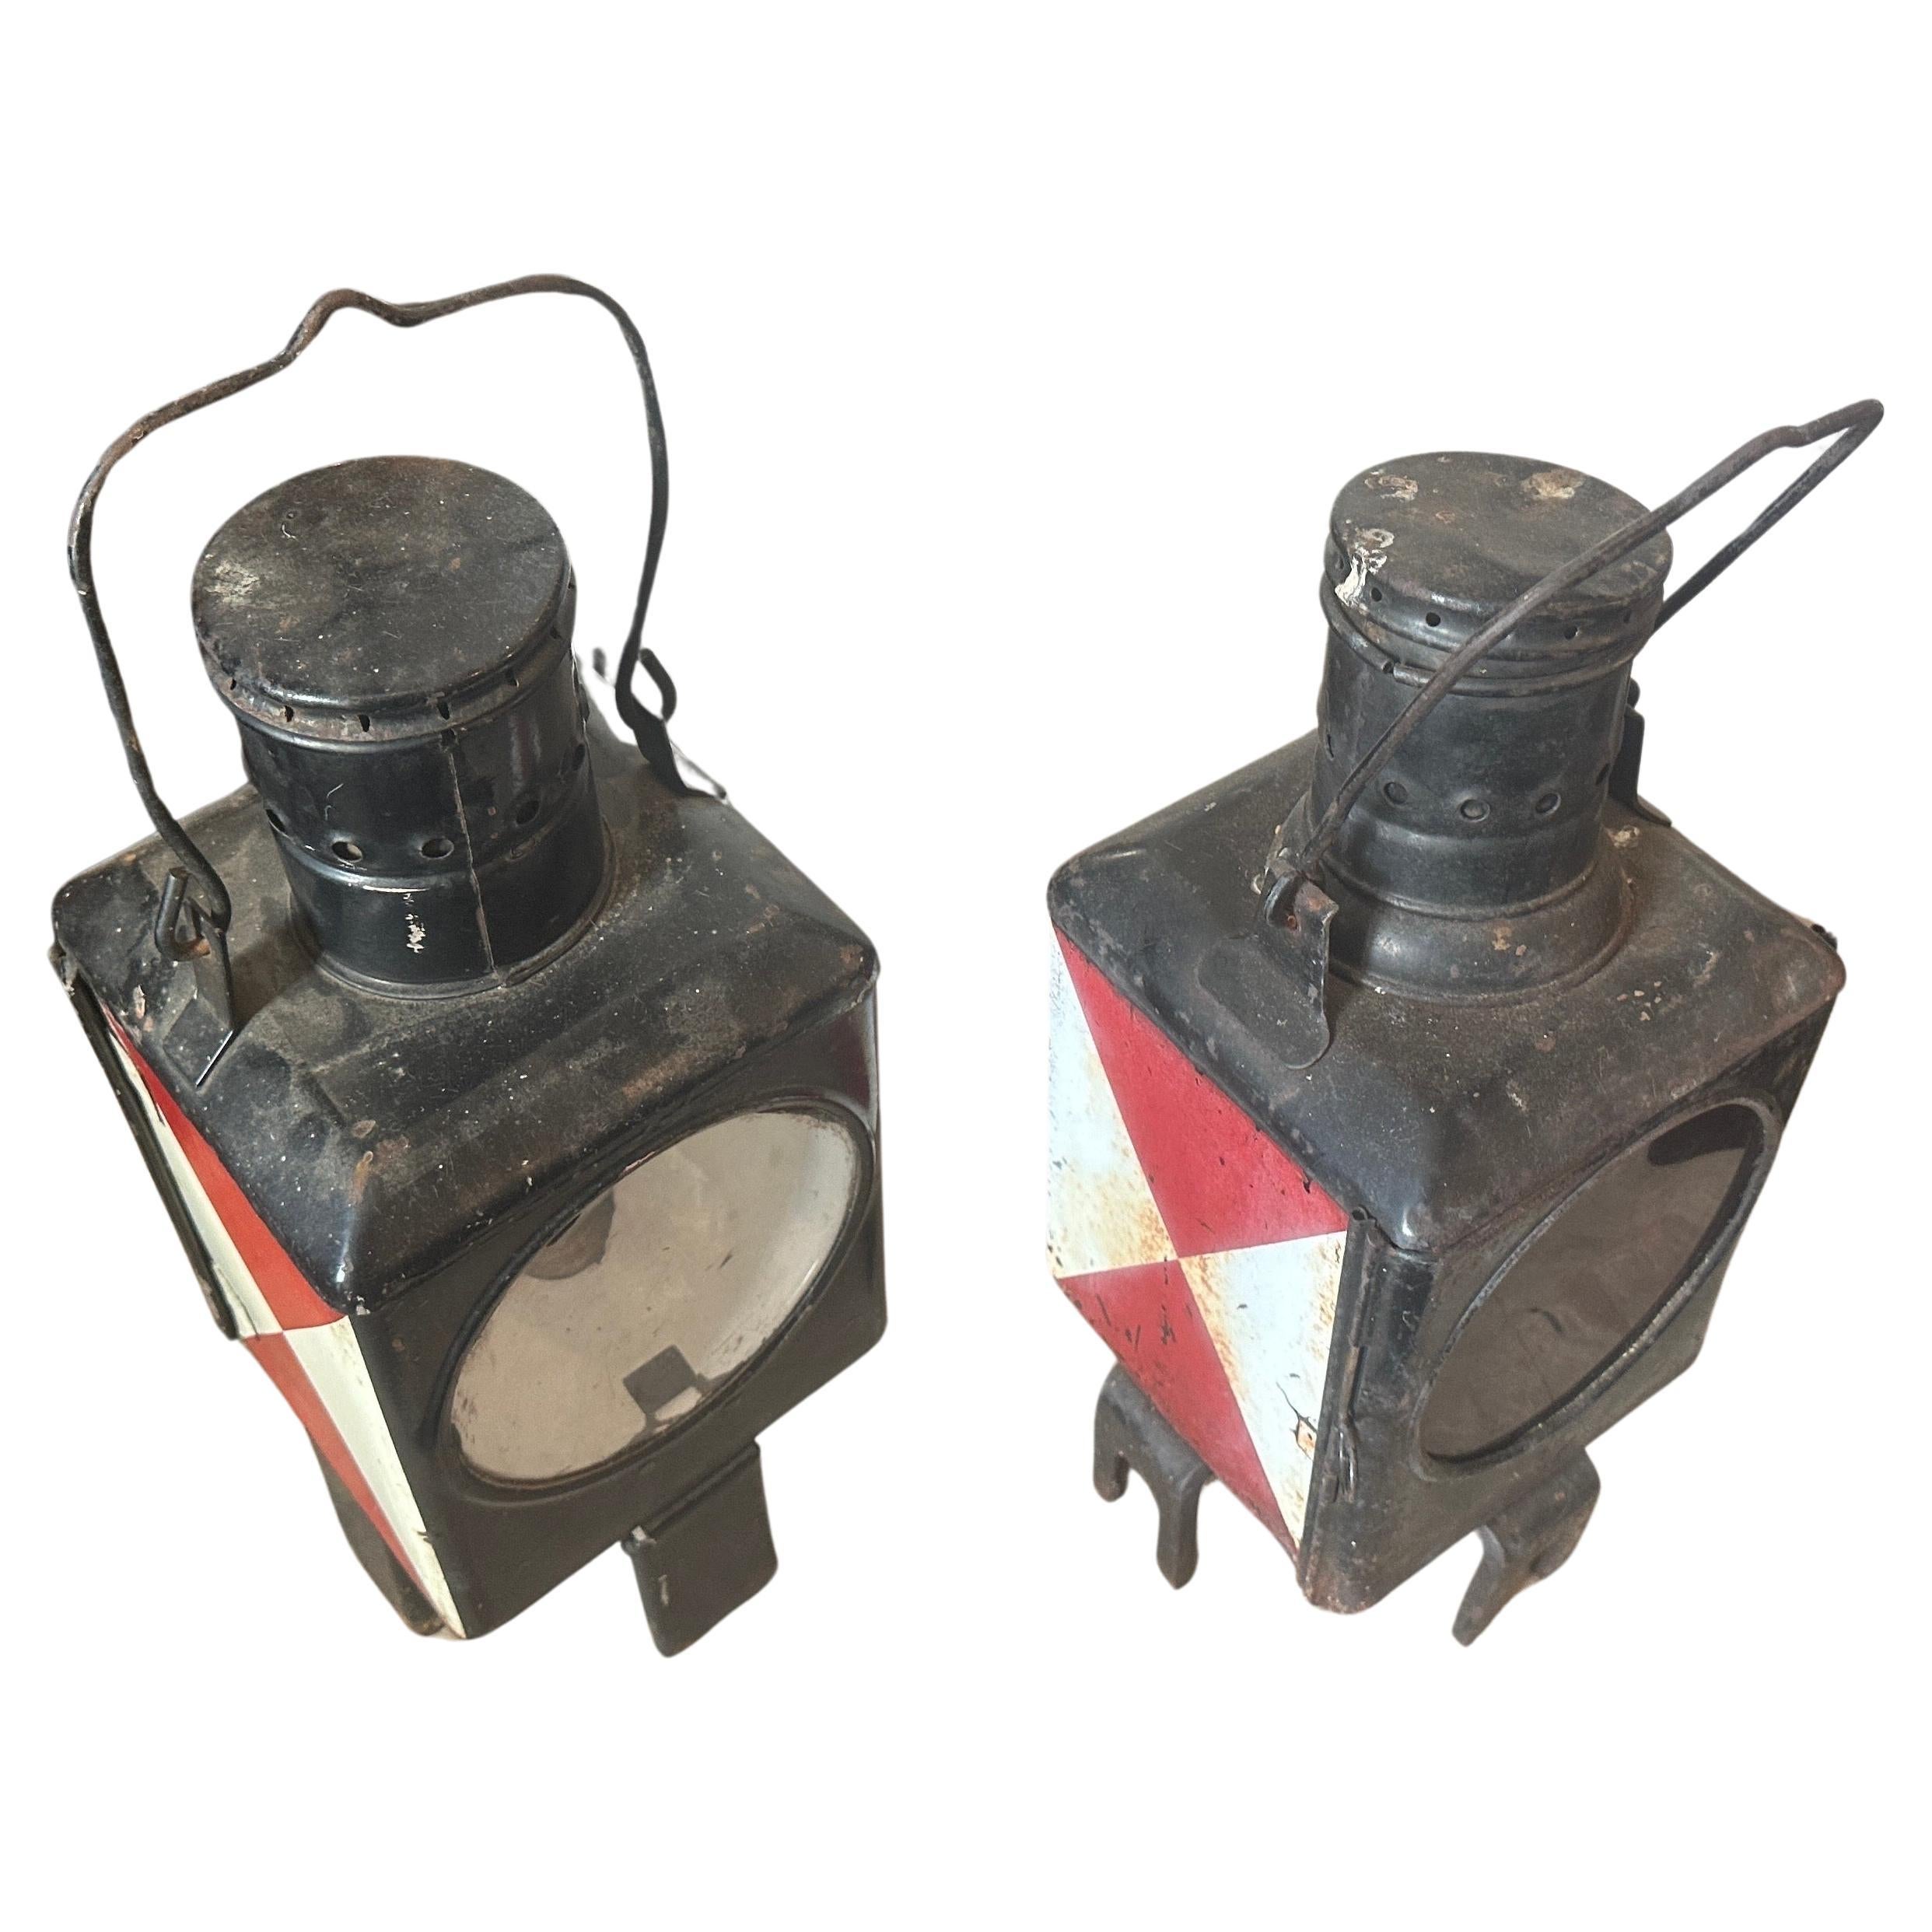 Two railways lanterns manufactured in Germany in the Thirties and used for railways signals. They are in original conditions and can be easily electrified and used. The frame of the lantern is made of iron, a common material for lanterns in the